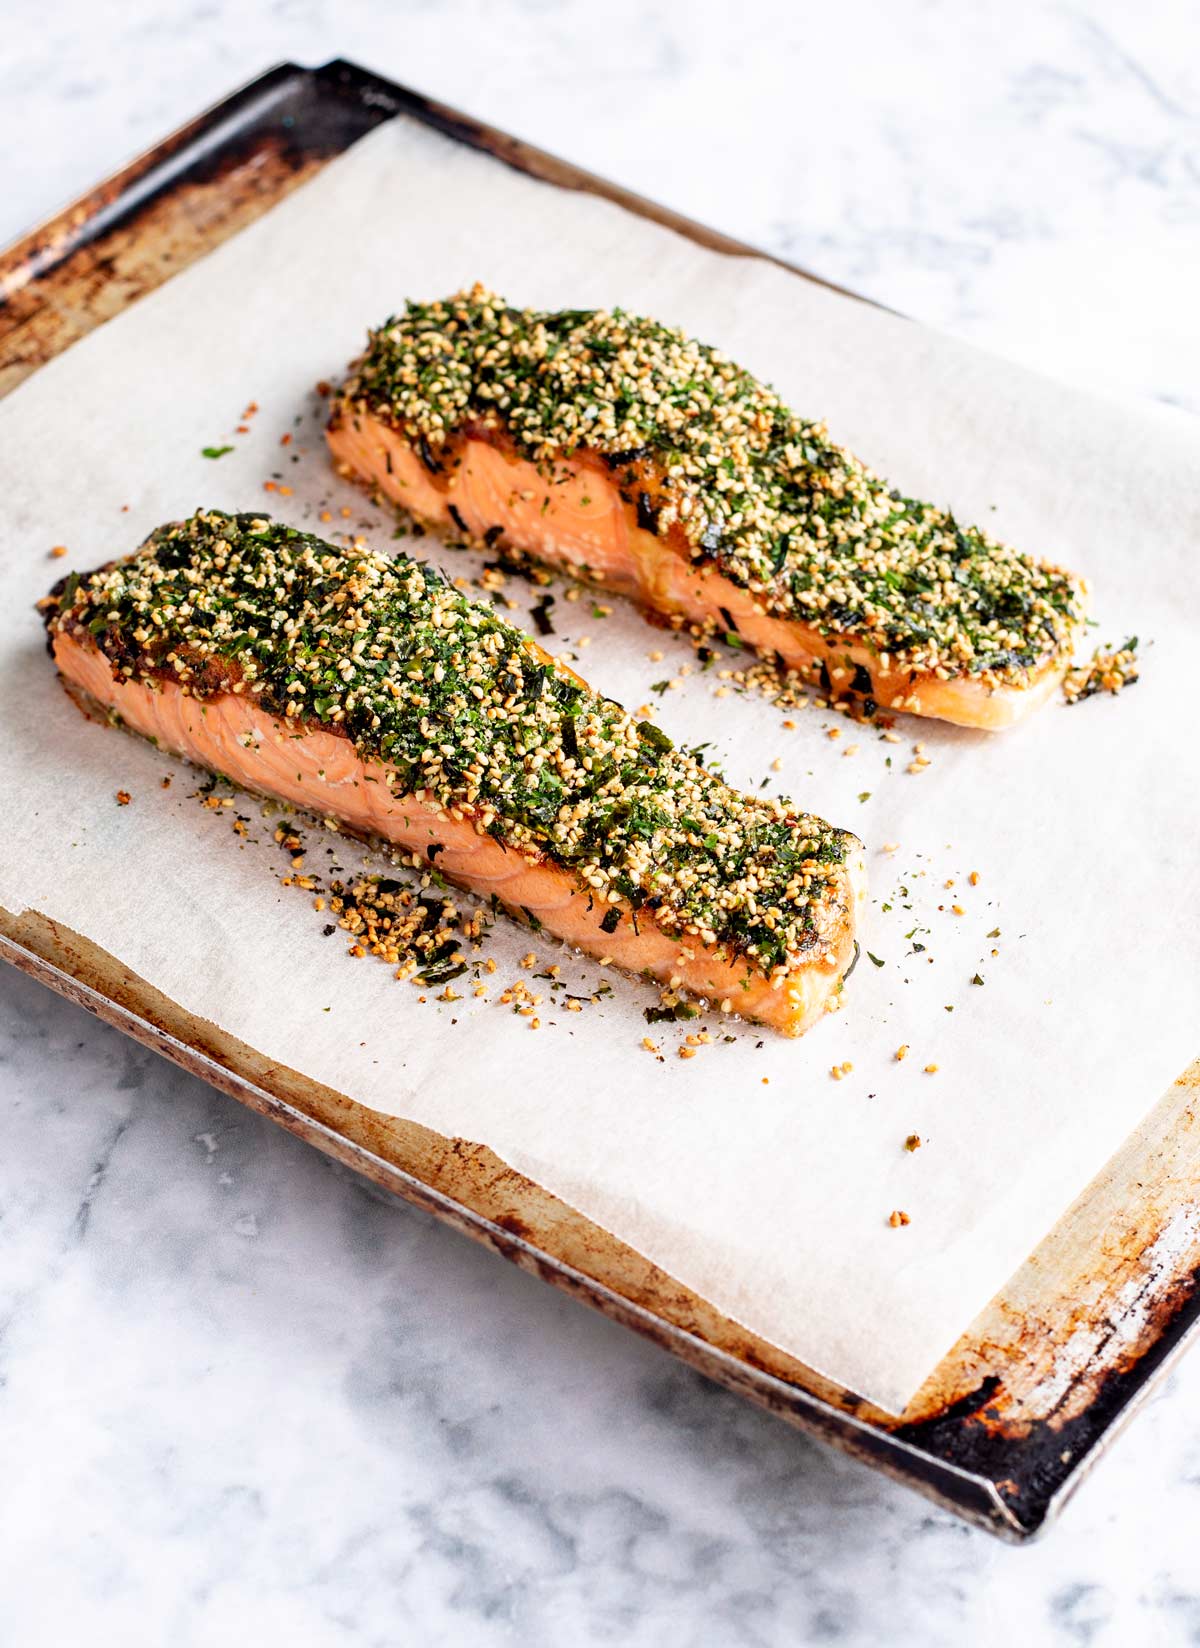 two cooked salmon fillets on a baking tray coated in Furikake